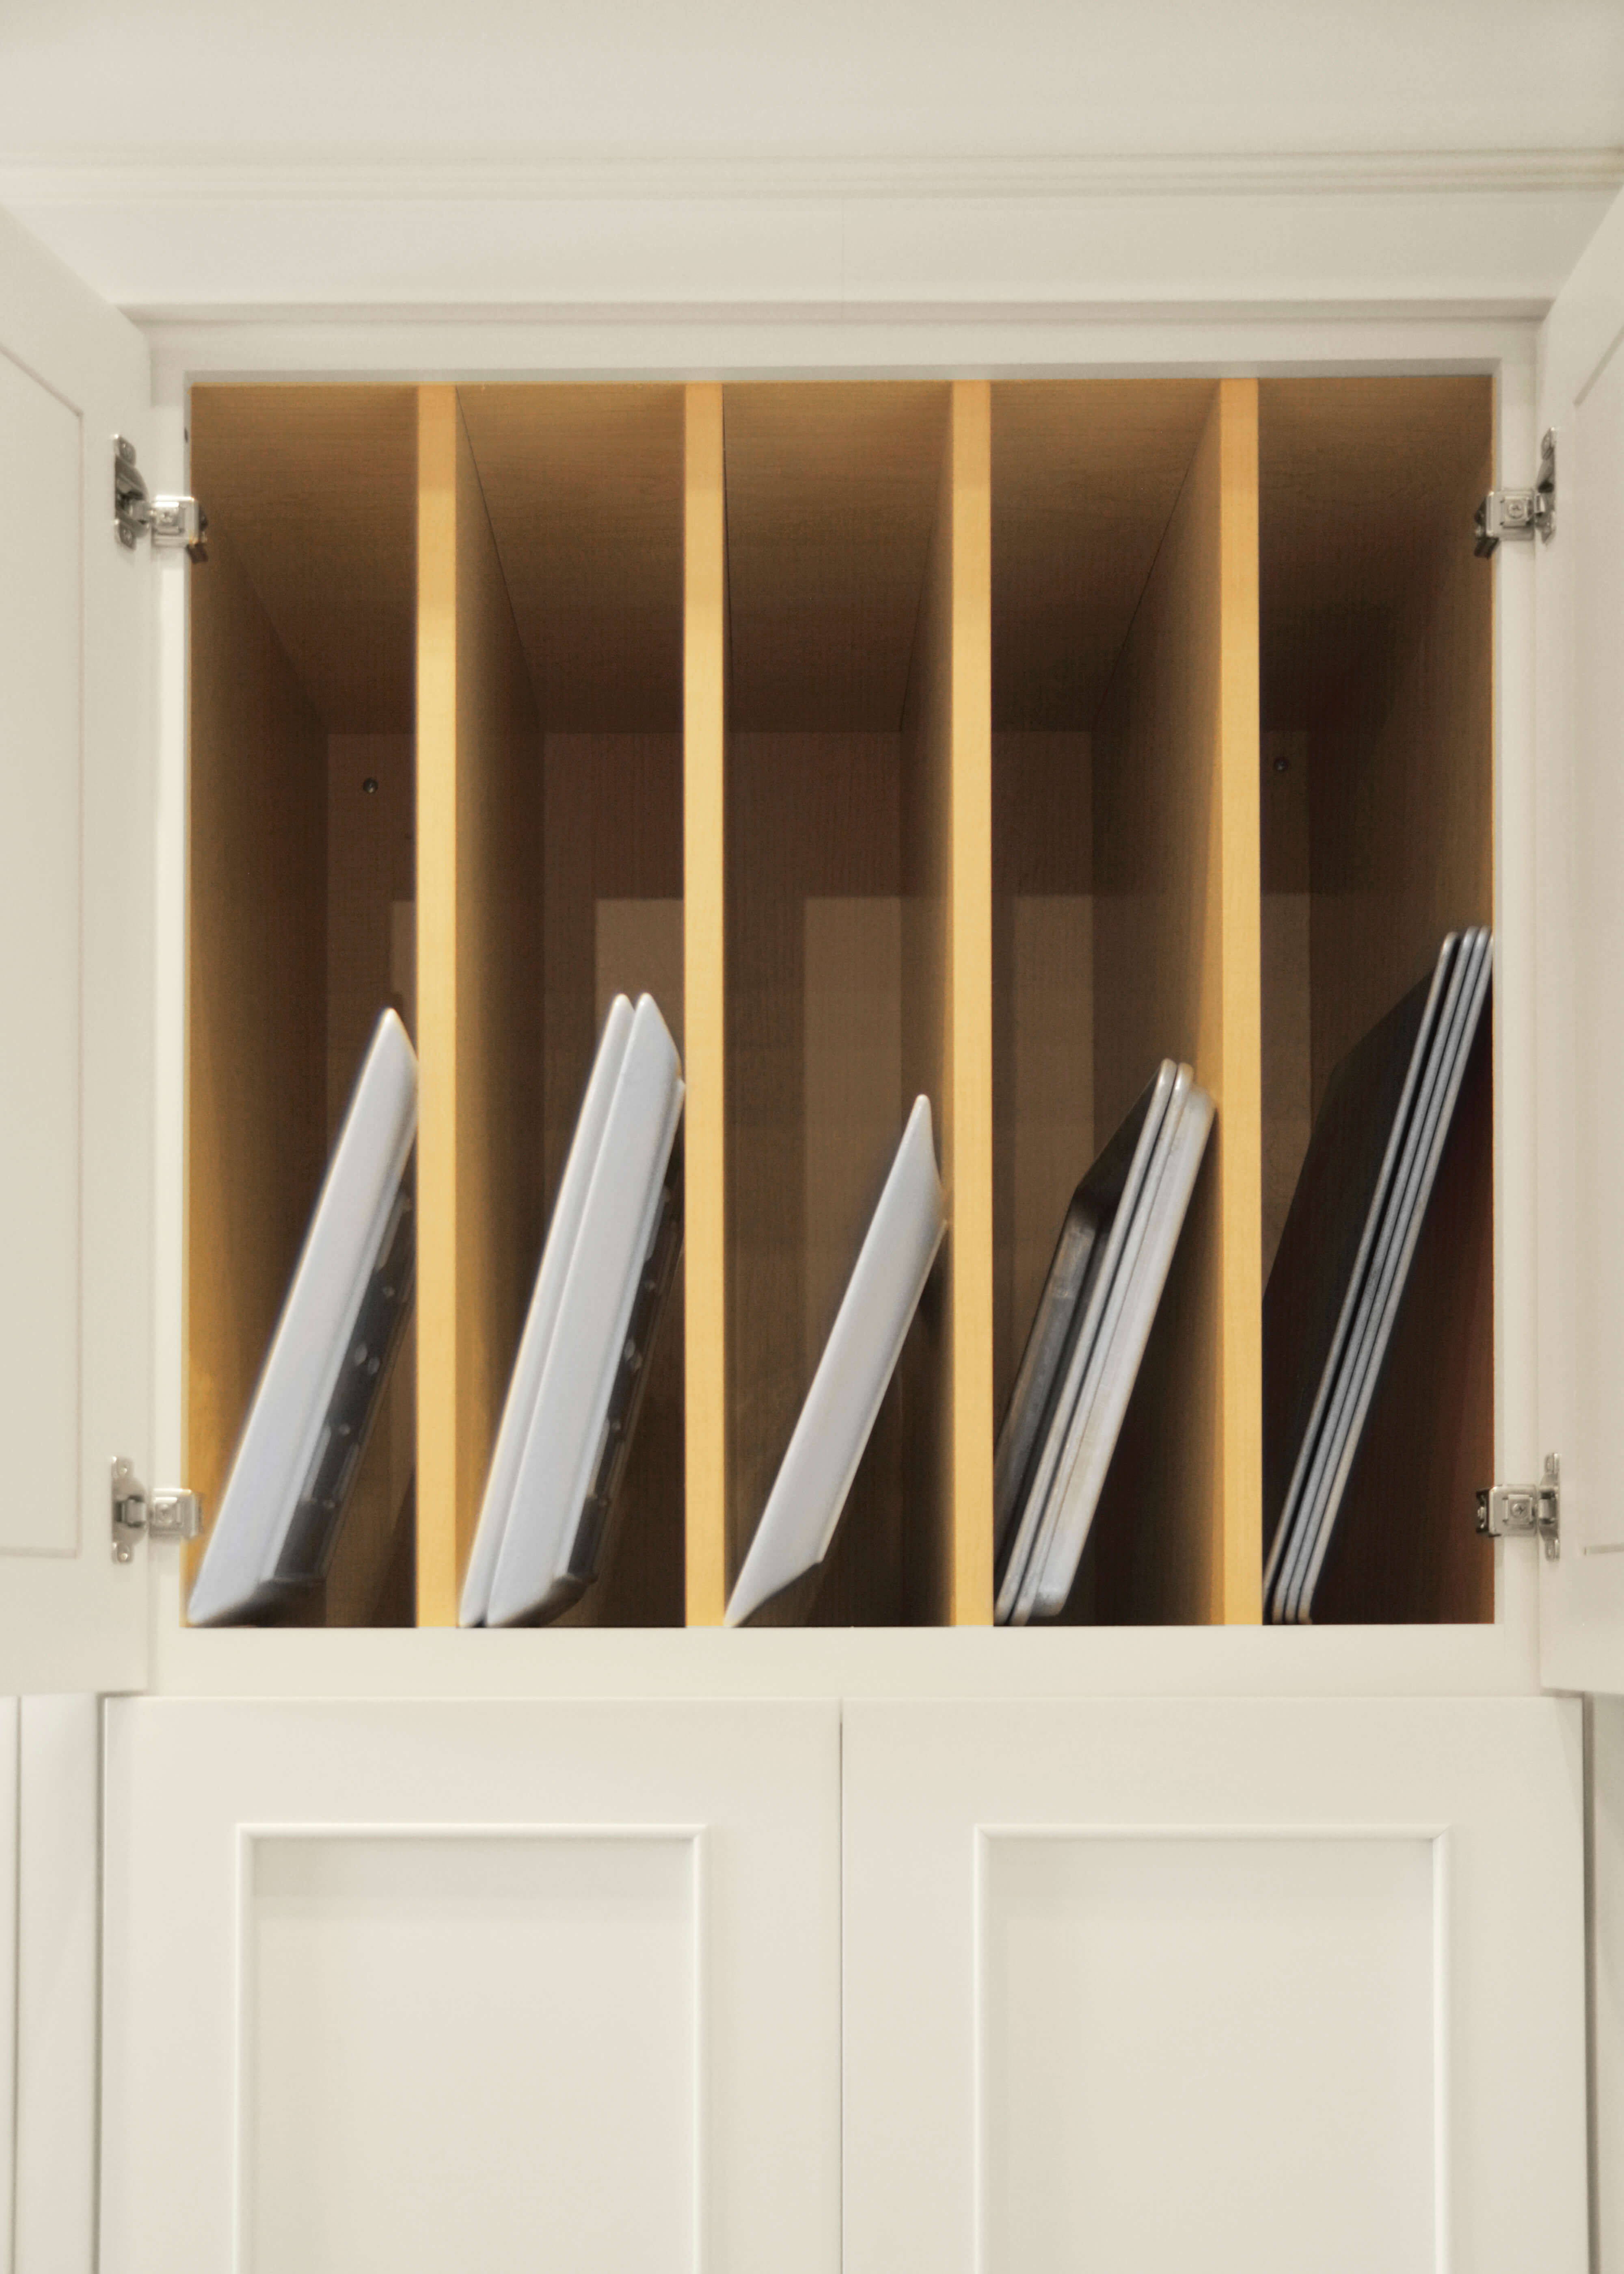 Cabinet partitions are used to create organized try and pan storage in an upper wall cabinet. The kitchen cabinets have a transitional style with a white paint factory finish.